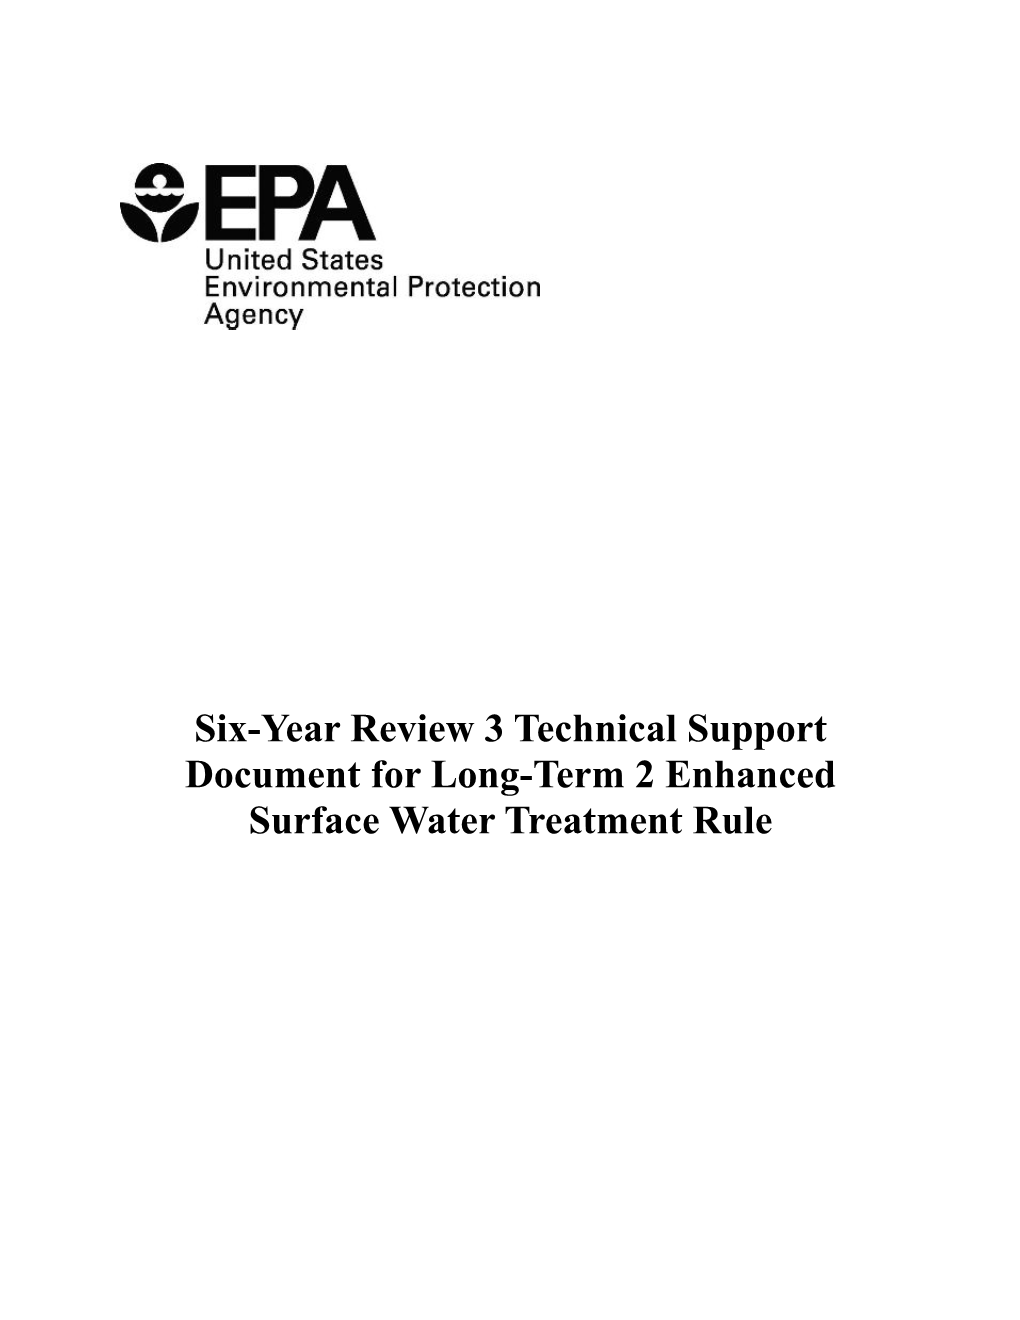 Six-Year Review 3 Technical Support Document for Long-Term 2